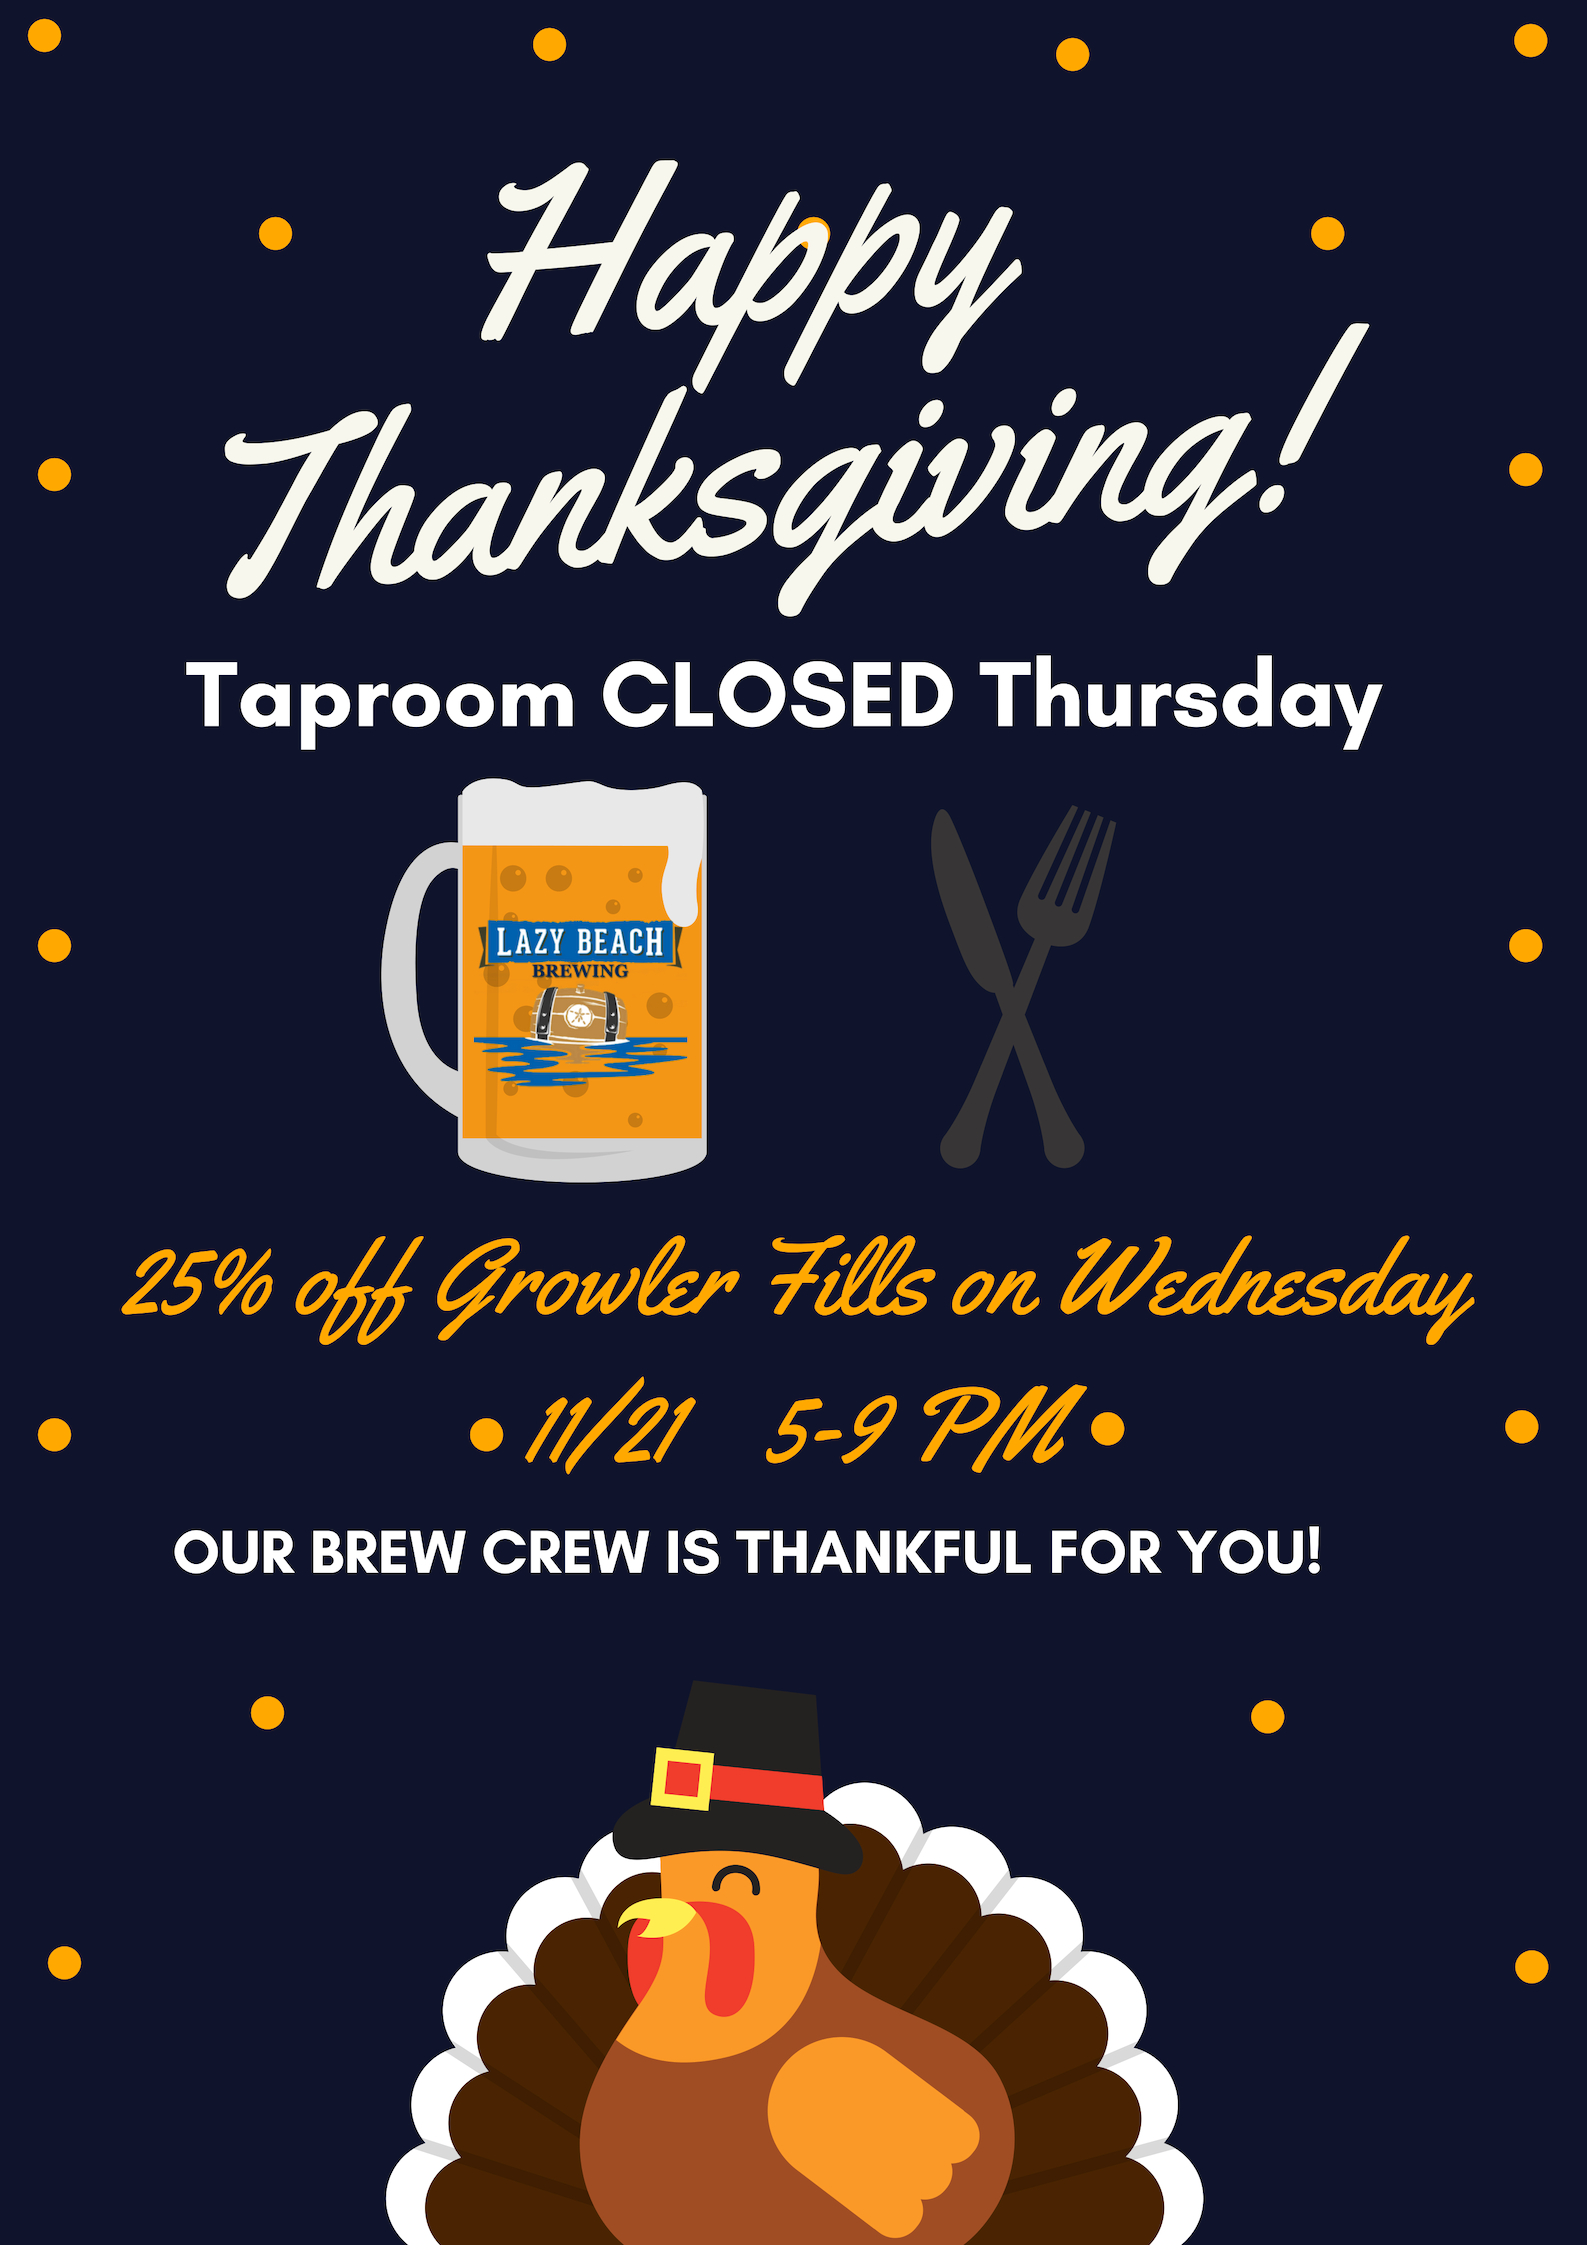 Thanksgiving Hours